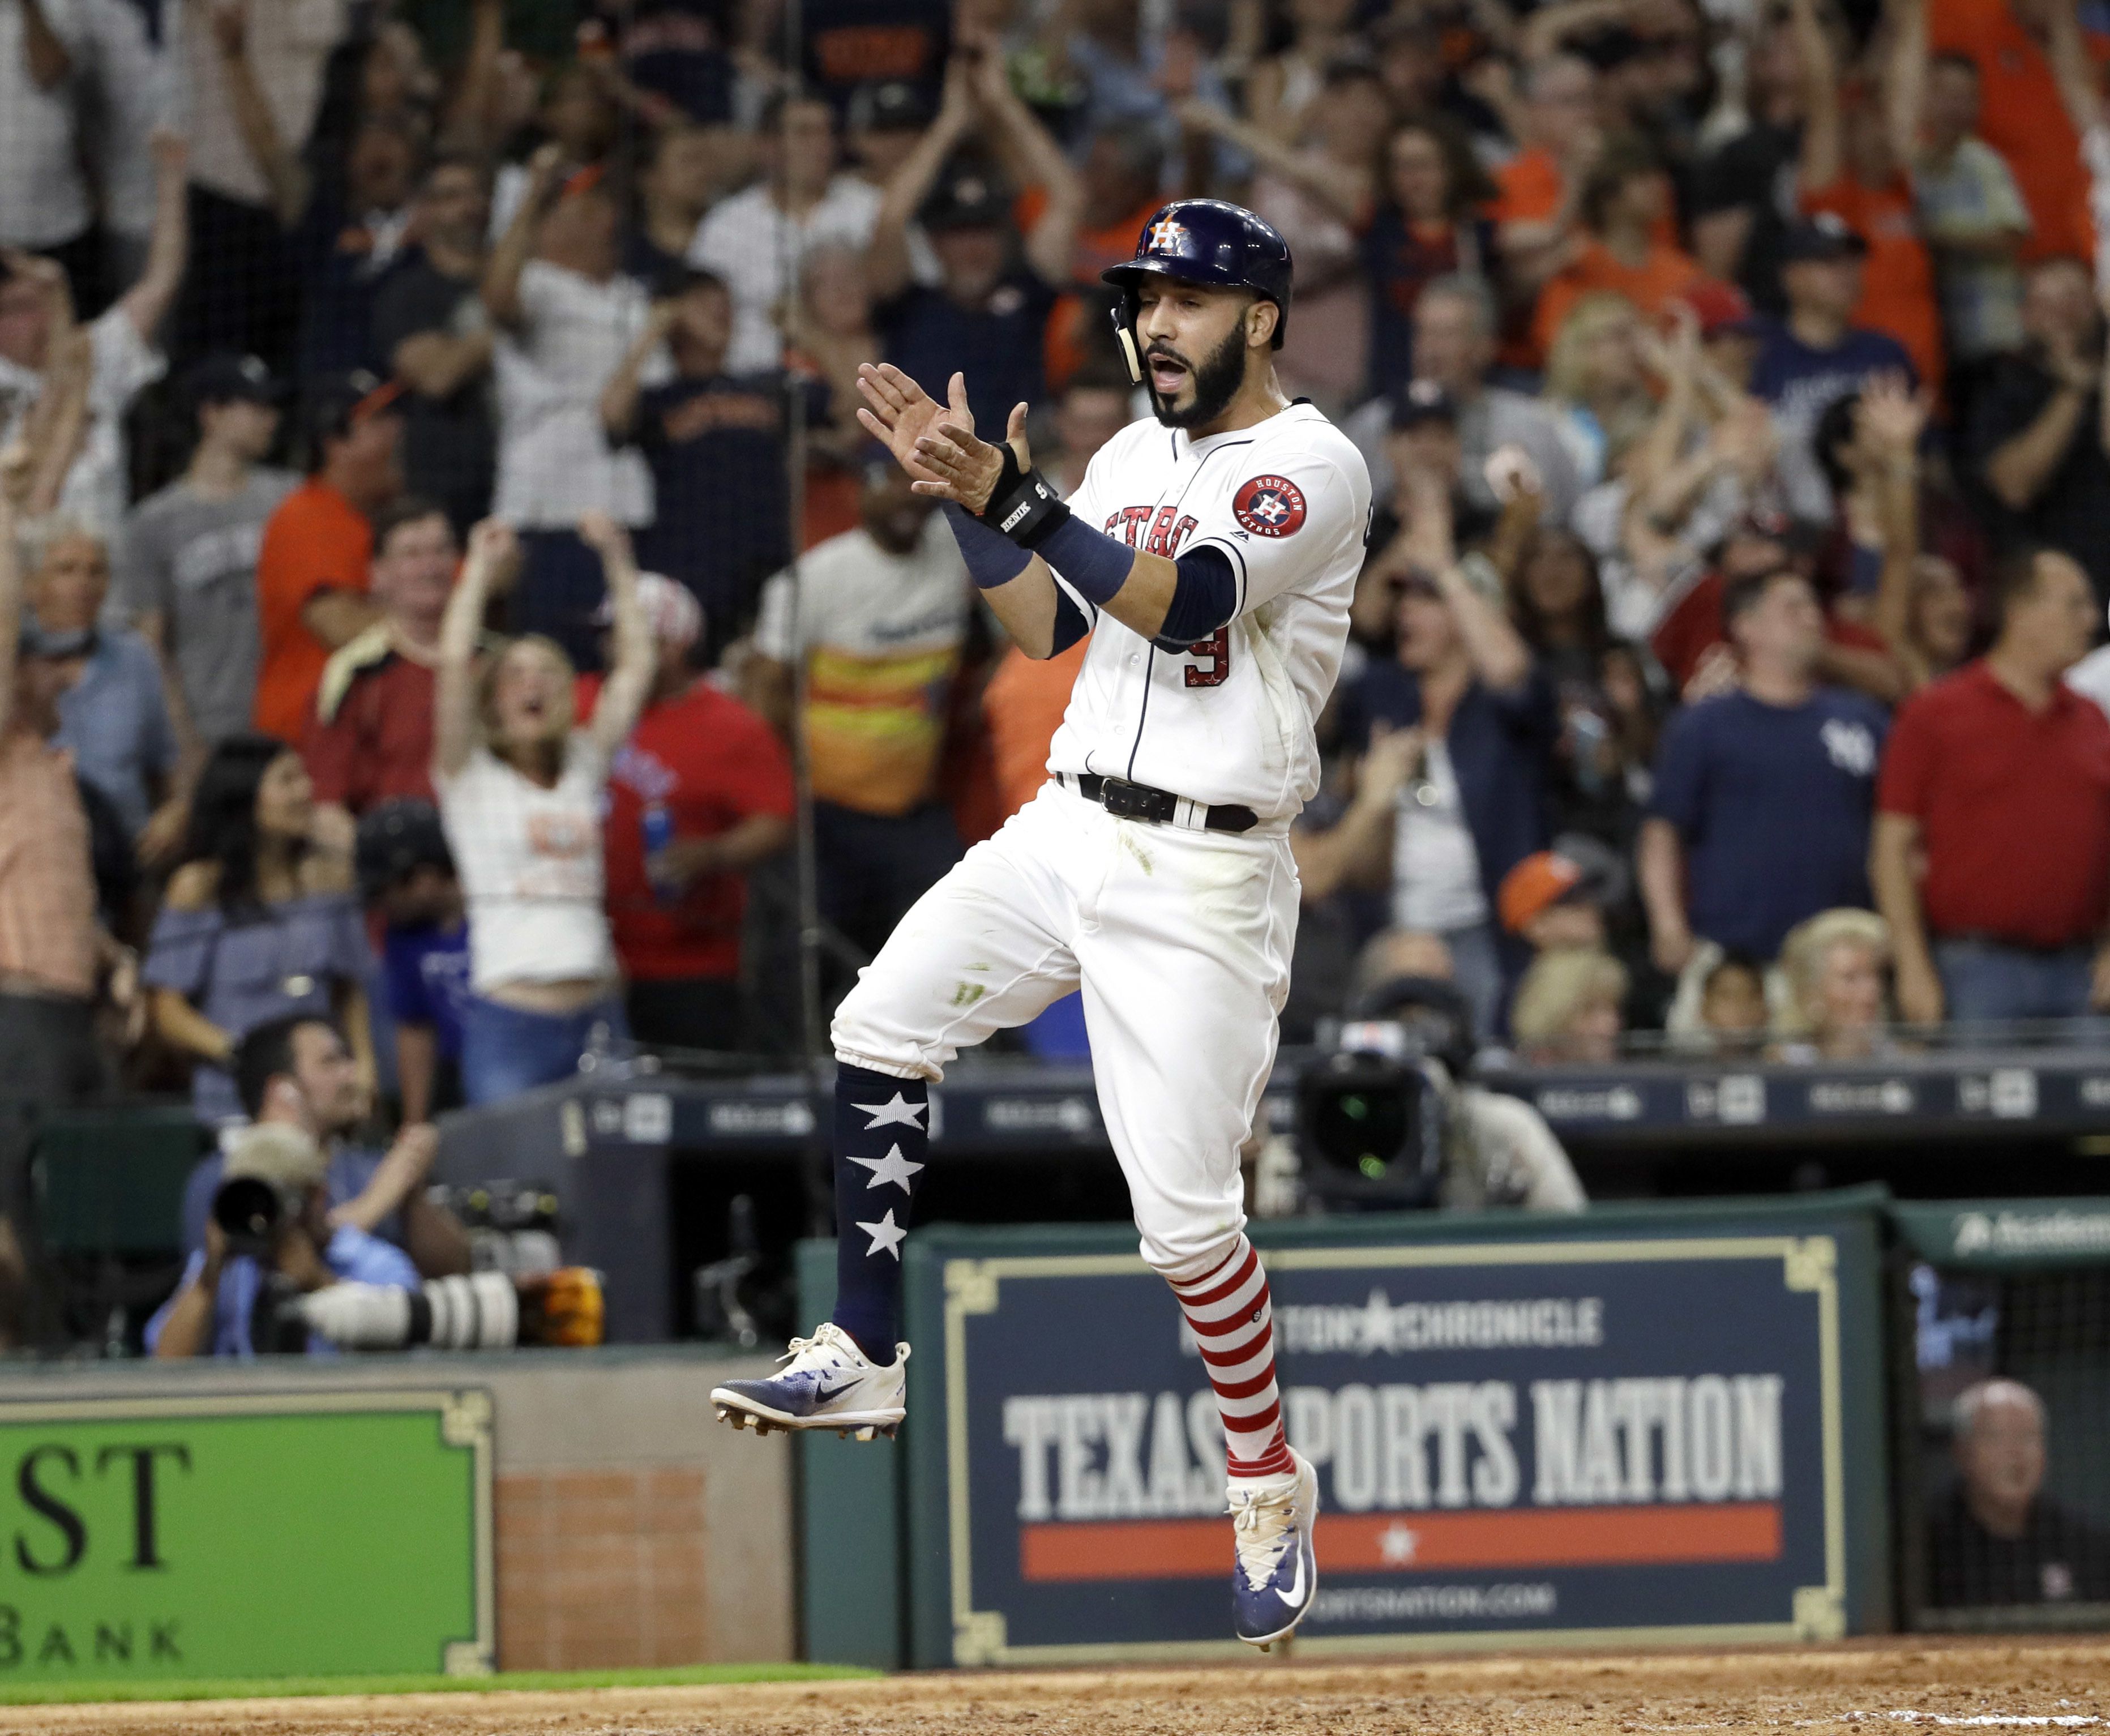 Boston Red Sox Lineup: Where is Marwin Gonzalez's power? - Over